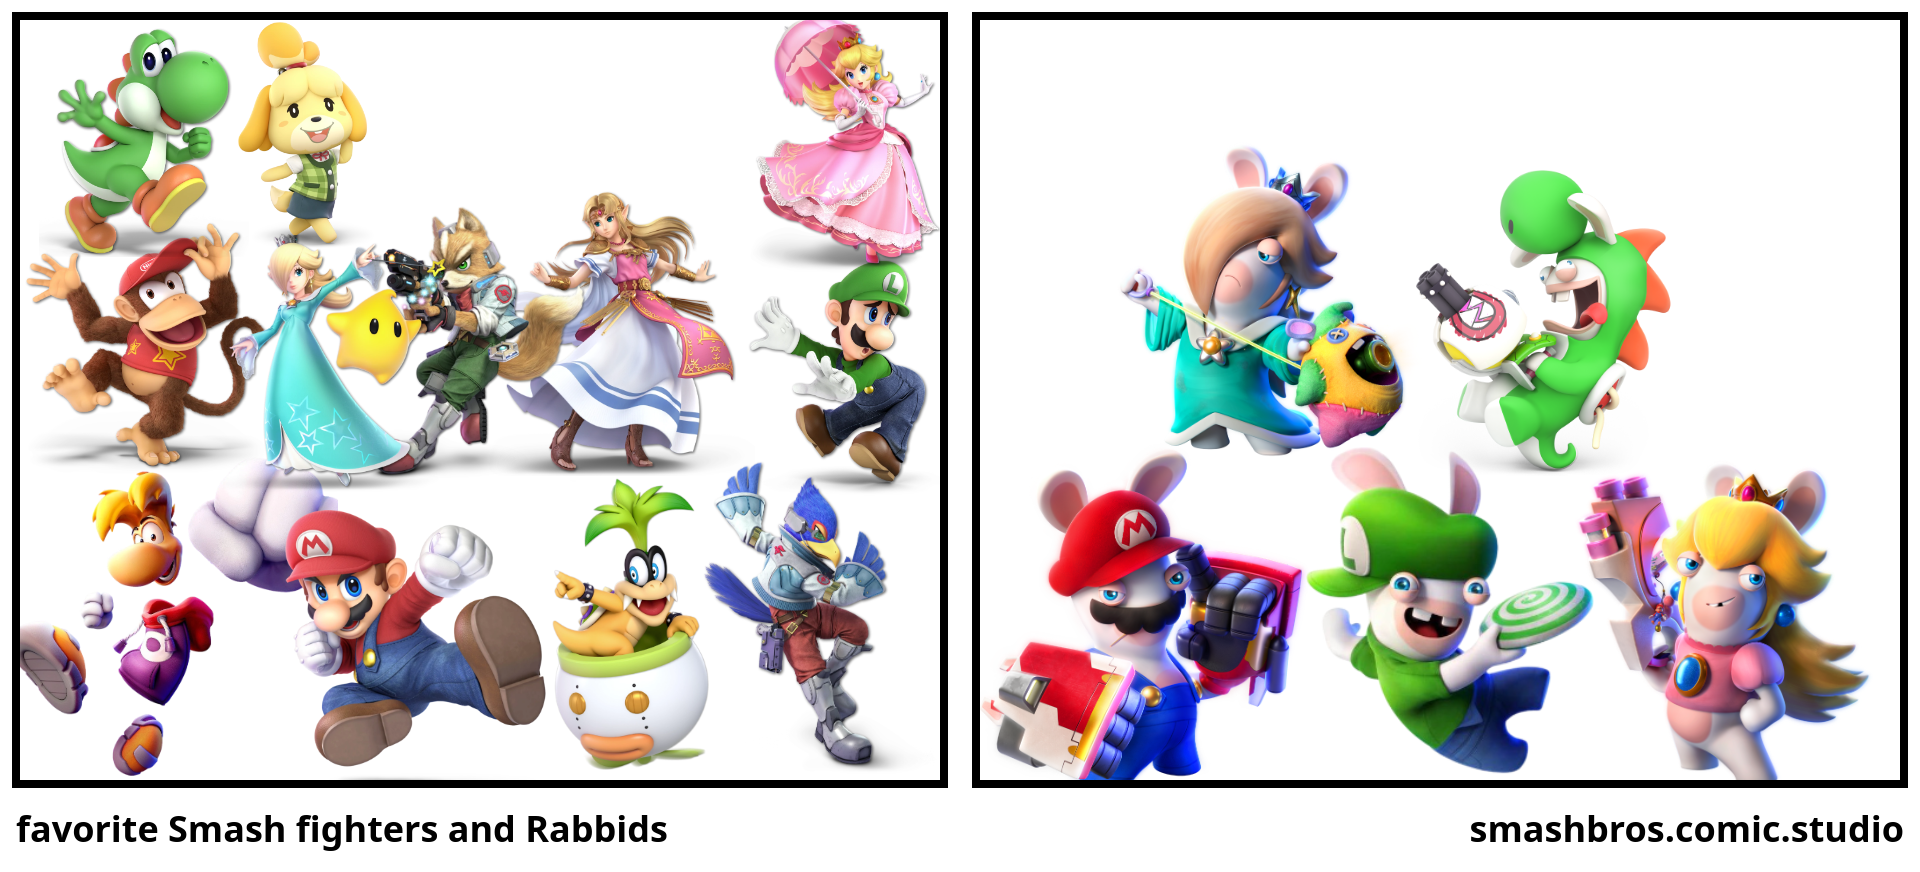 favorite Smash fighters and Rabbids